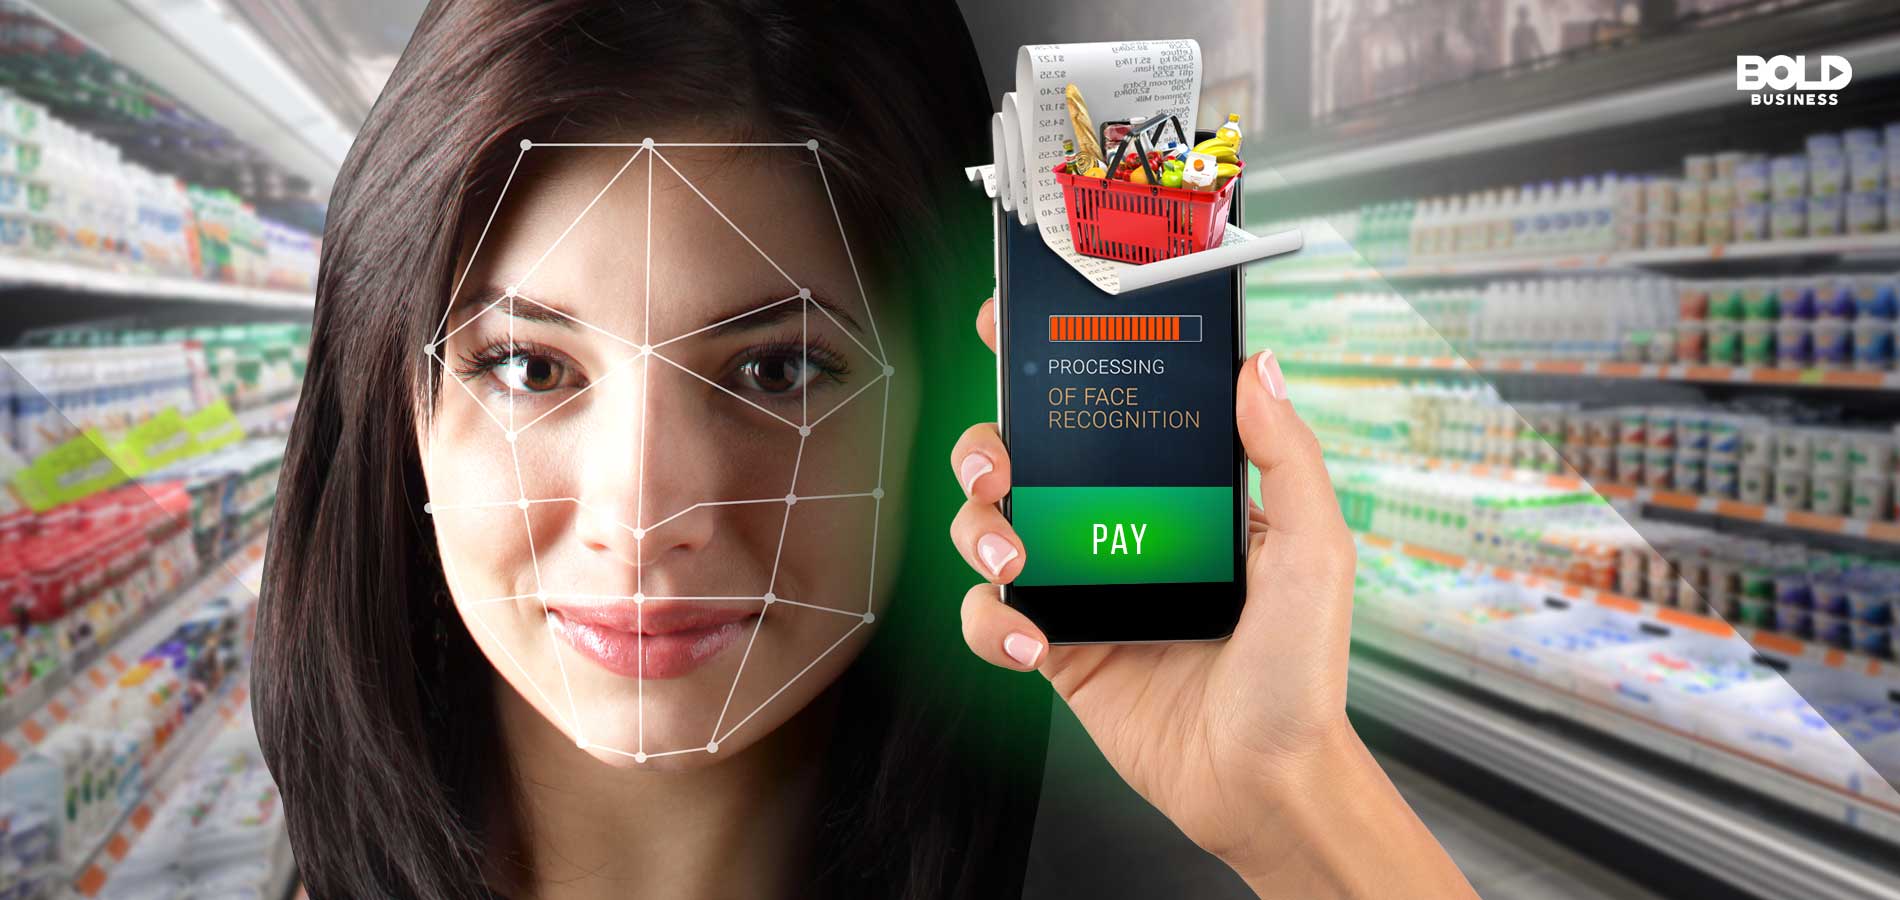 a photo of a woman's face being scanned with a phone that has its screen showing the words, "PROCESSING OF FACE RECOGNITION" and an image of a grocery basket and receipt, depicting the rising trend of biometric wallets